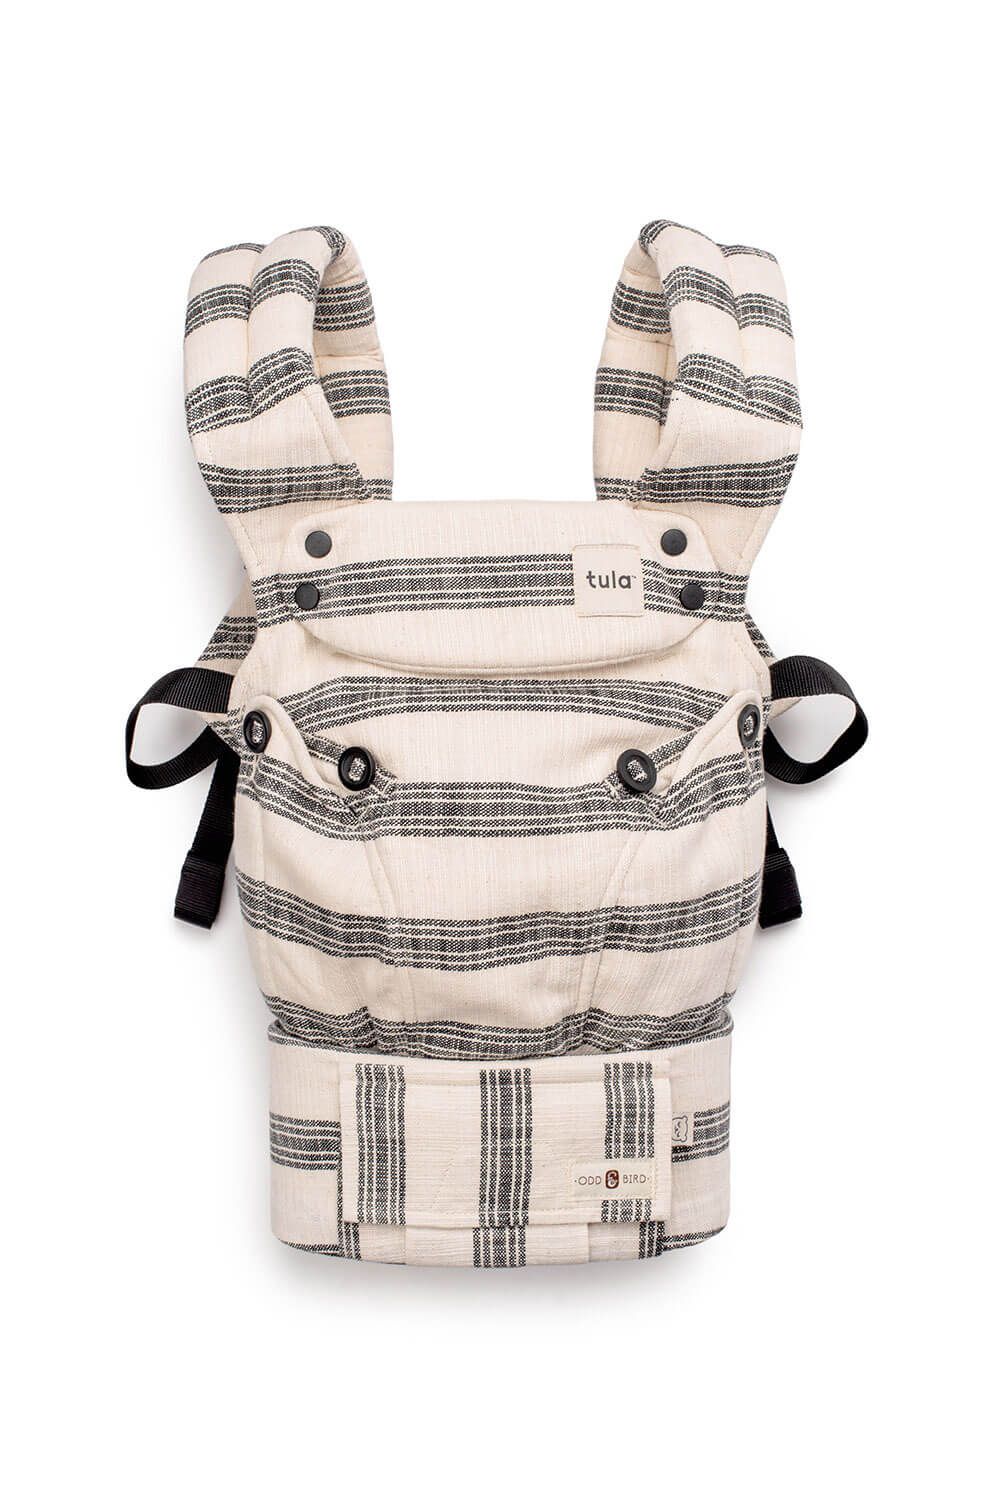 Sultan - Signature Woven Explore Baby Carrier | Baby Tula